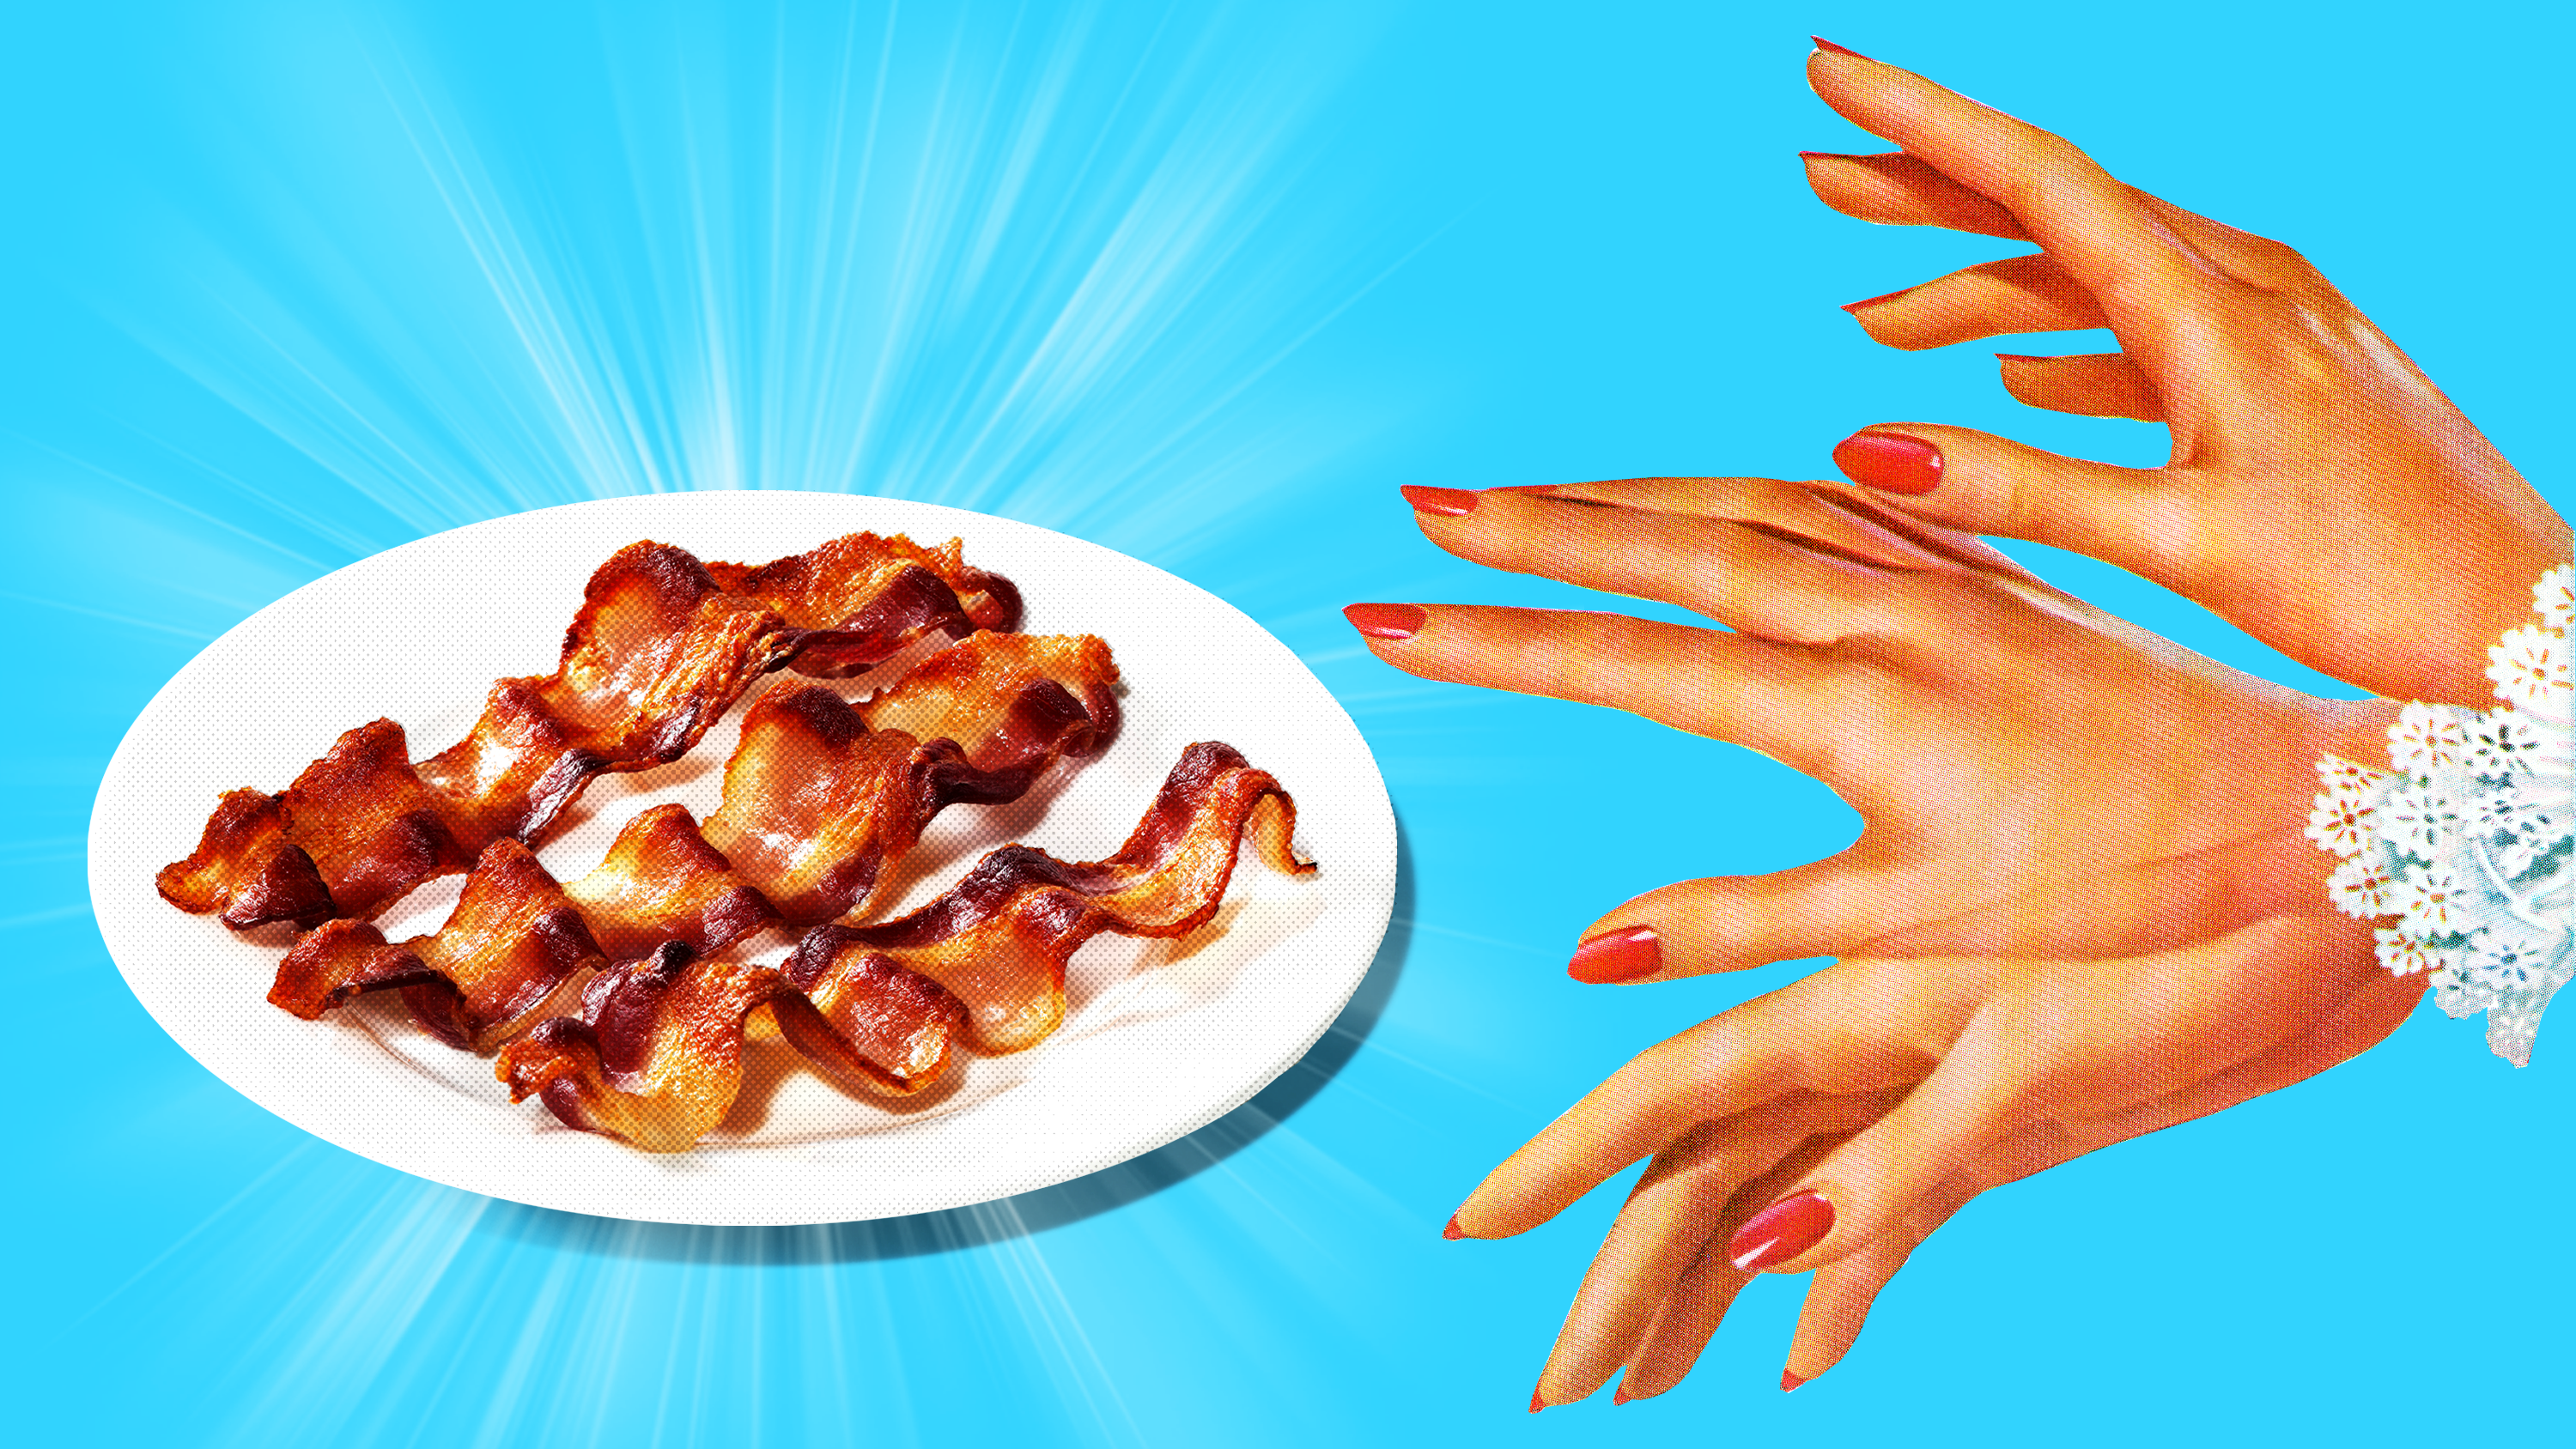 11 Delicious Ways to Cook With Bacon and Its Grease